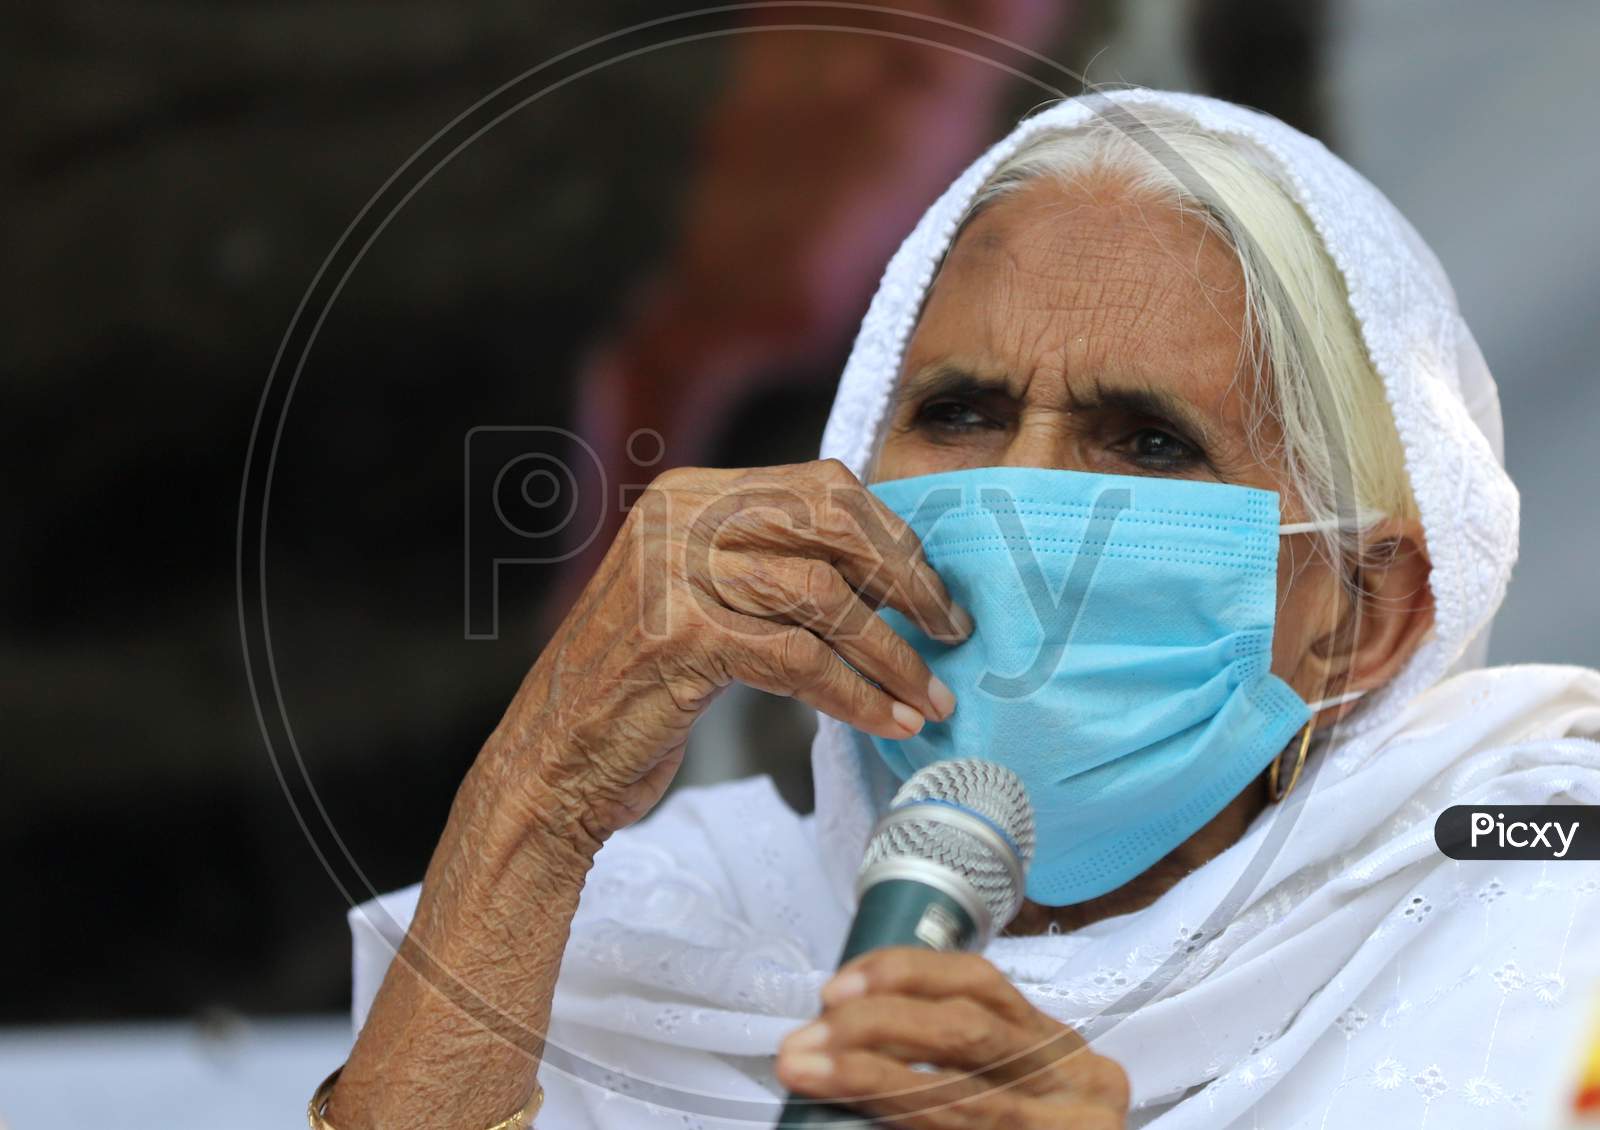 Bilkis Bano attends a press conference in New Delhi, India, 29 September 2020. The 82-year-old Indian protester Bilkis Bano, who became known as 'dadi' (grandmother) of Shaheen Bagh when she participated in anti-Citizenship Amendment Act (CAA) protests, was named as one of the 100 most influential p